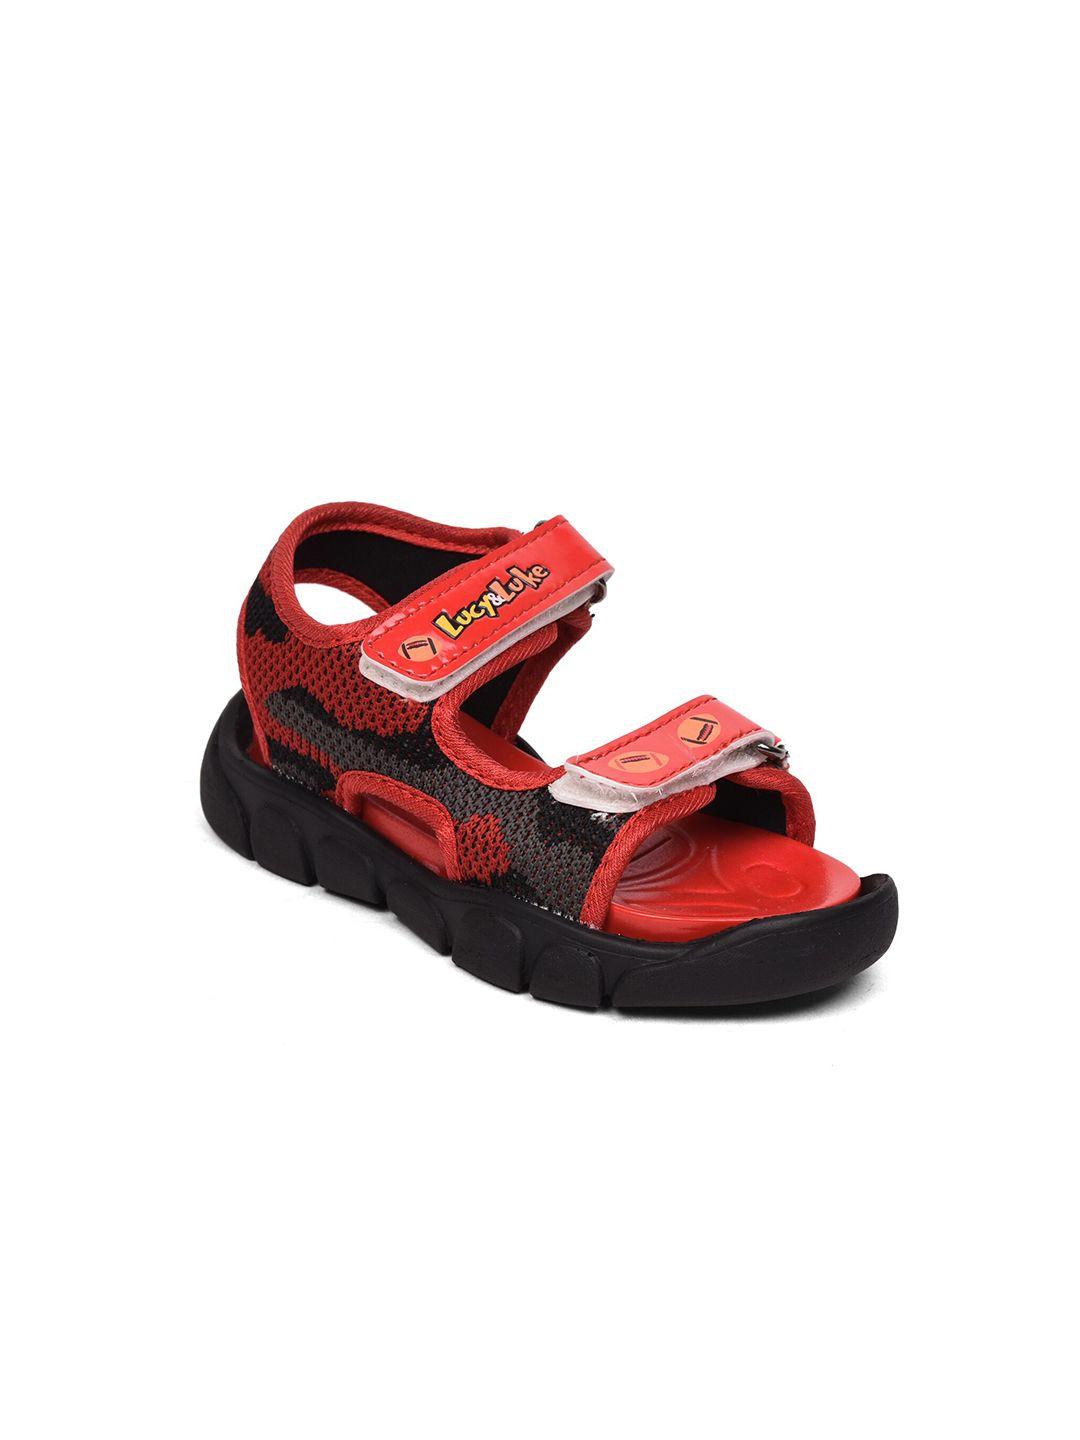 liberty-unisex-kids-red-printed-sports-sandals